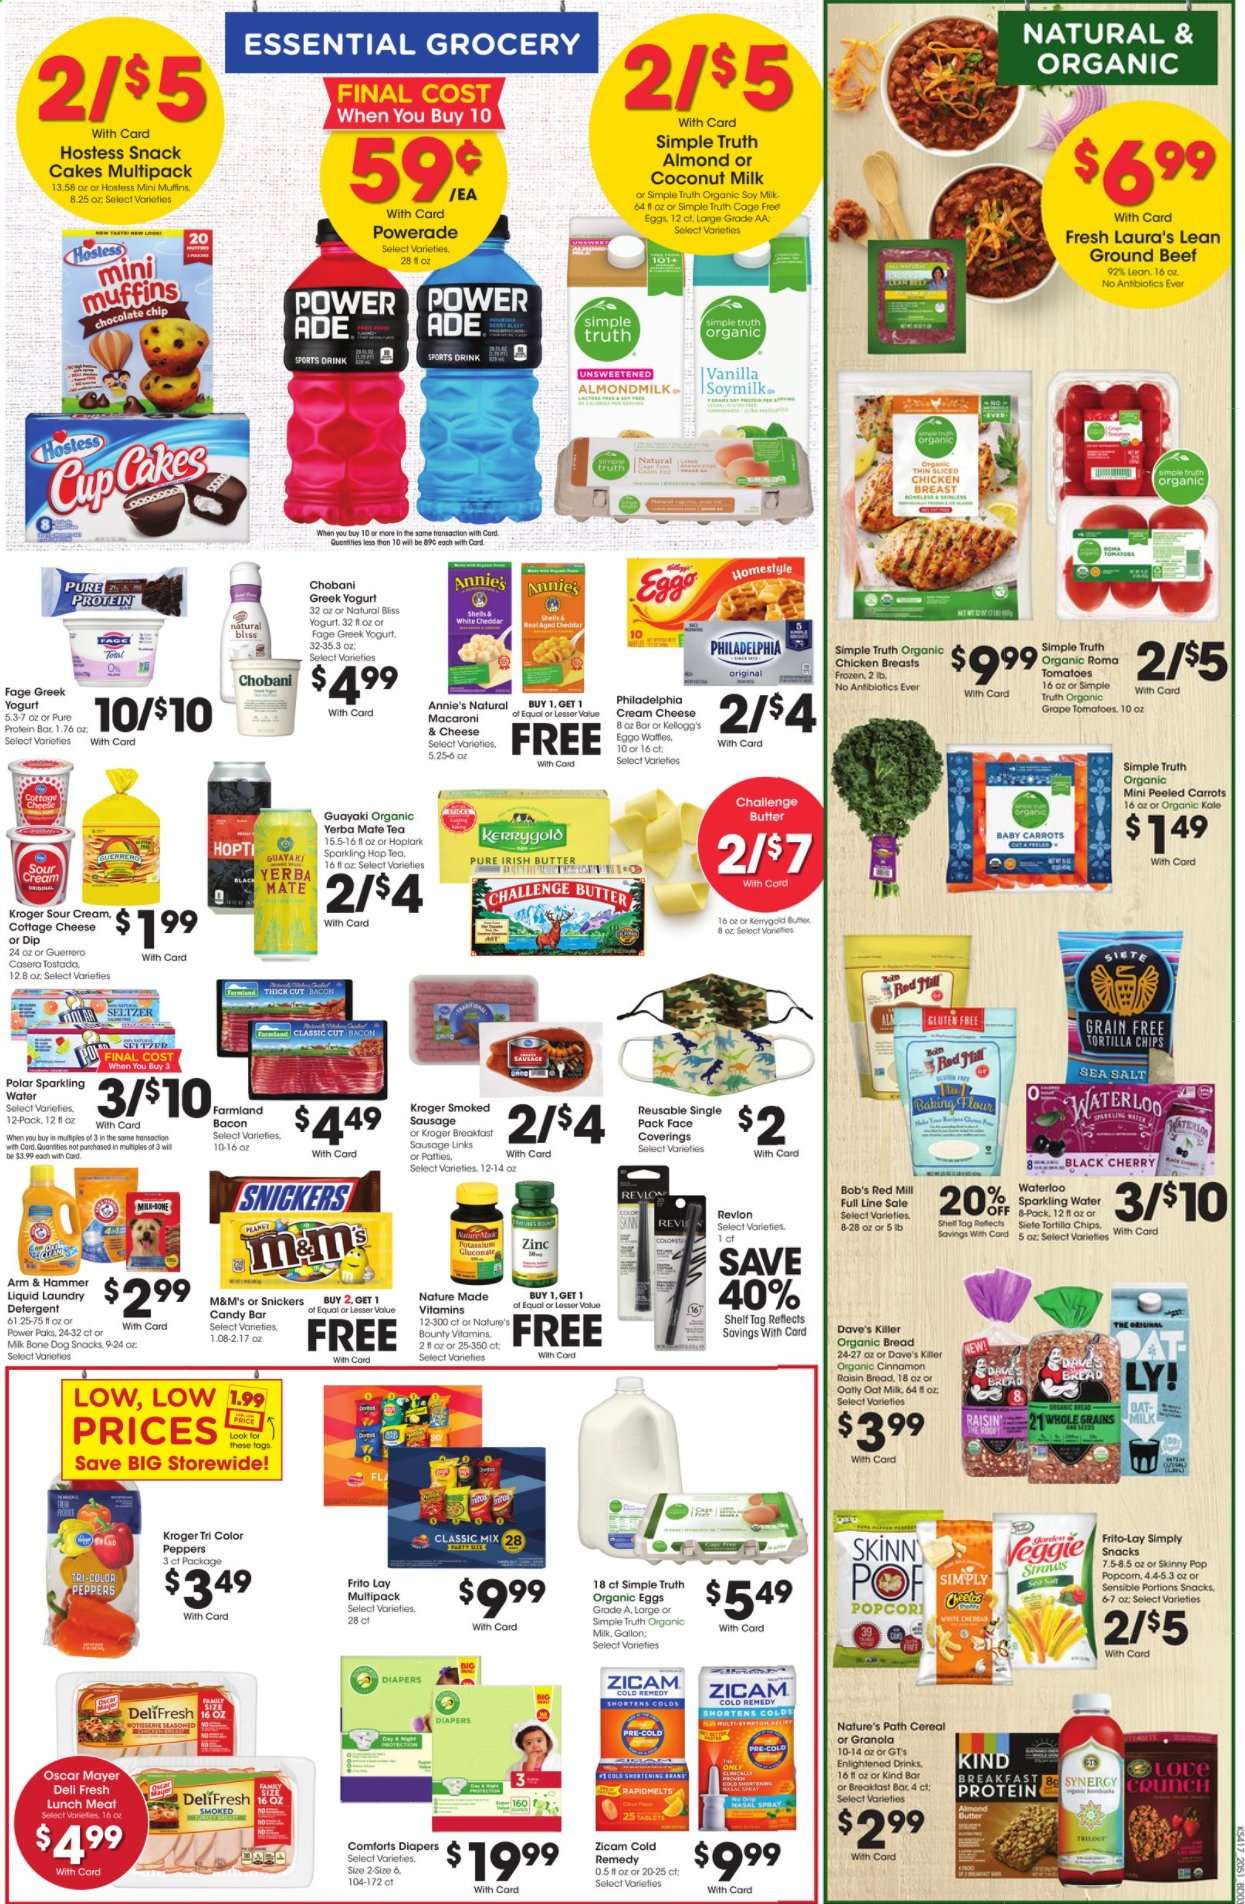 thumbnail - City Market Flyer - 01/20/2021 - 01/26/2021 - Sales products - bread, cake, muffin, cream cheese, macaroni & cheese, Annie's, bacon, Oscar Mayer, sausage, smoked sausage, lunch meat, cottage cheese, Philadelphia, cheddar, greek yoghurt, yoghurt, Chobani, almond milk, soy milk, organic milk, oat milk, eggs, butter, sour cream, dip, Enlightened lce Cream, carrots, Snickers, Bounty, M&M's, Kellogg's, tortilla chips, snack, Frito-Lay, Skinny Pop, ARM & HAMMER, flour, oats, sea salt, coconut milk, cereals, granola, protein bar, raisins, Powerade, seltzer water, sparkling water, tea, chicken breasts, beef meat, ground beef, detergent, laundry detergent, Revlon, Nature Made, Nature's Bounty, zinc. Page 5.